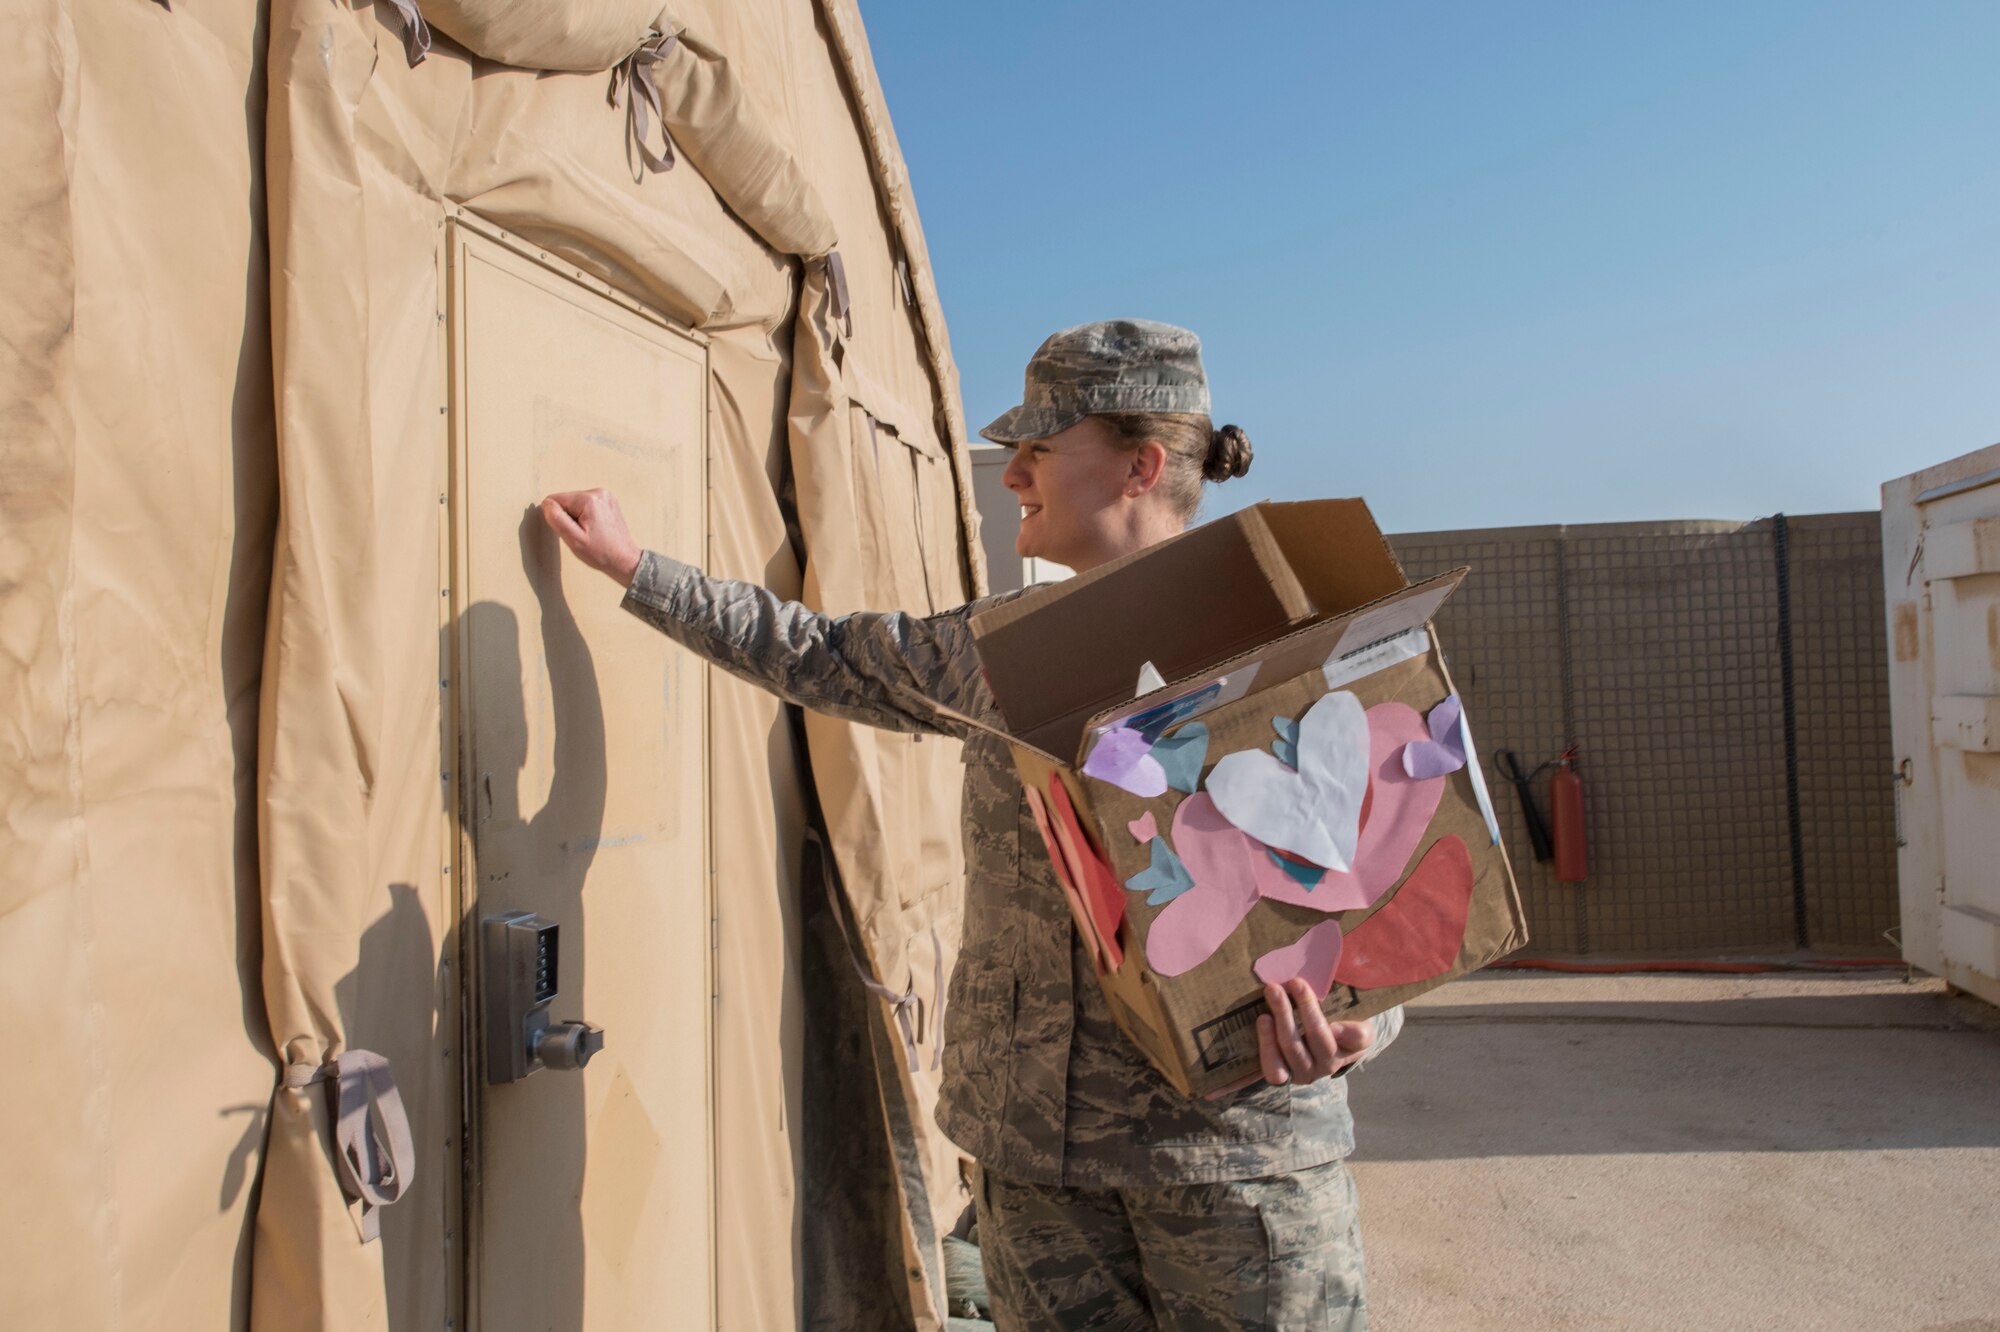 Airman 1st Class Meagan Mackie, 332nd Expeditionary Civil Engineer Squadron emergency management journeyman, reads a Valentine’s Day card, Feb. 14, 2017, in Southwest Asia. Students from Cape Cod, Massachusetts handcrafted cards for service members serving overseas. (U.S. Air Force photo by Staff Sgt. Eboni Reams)